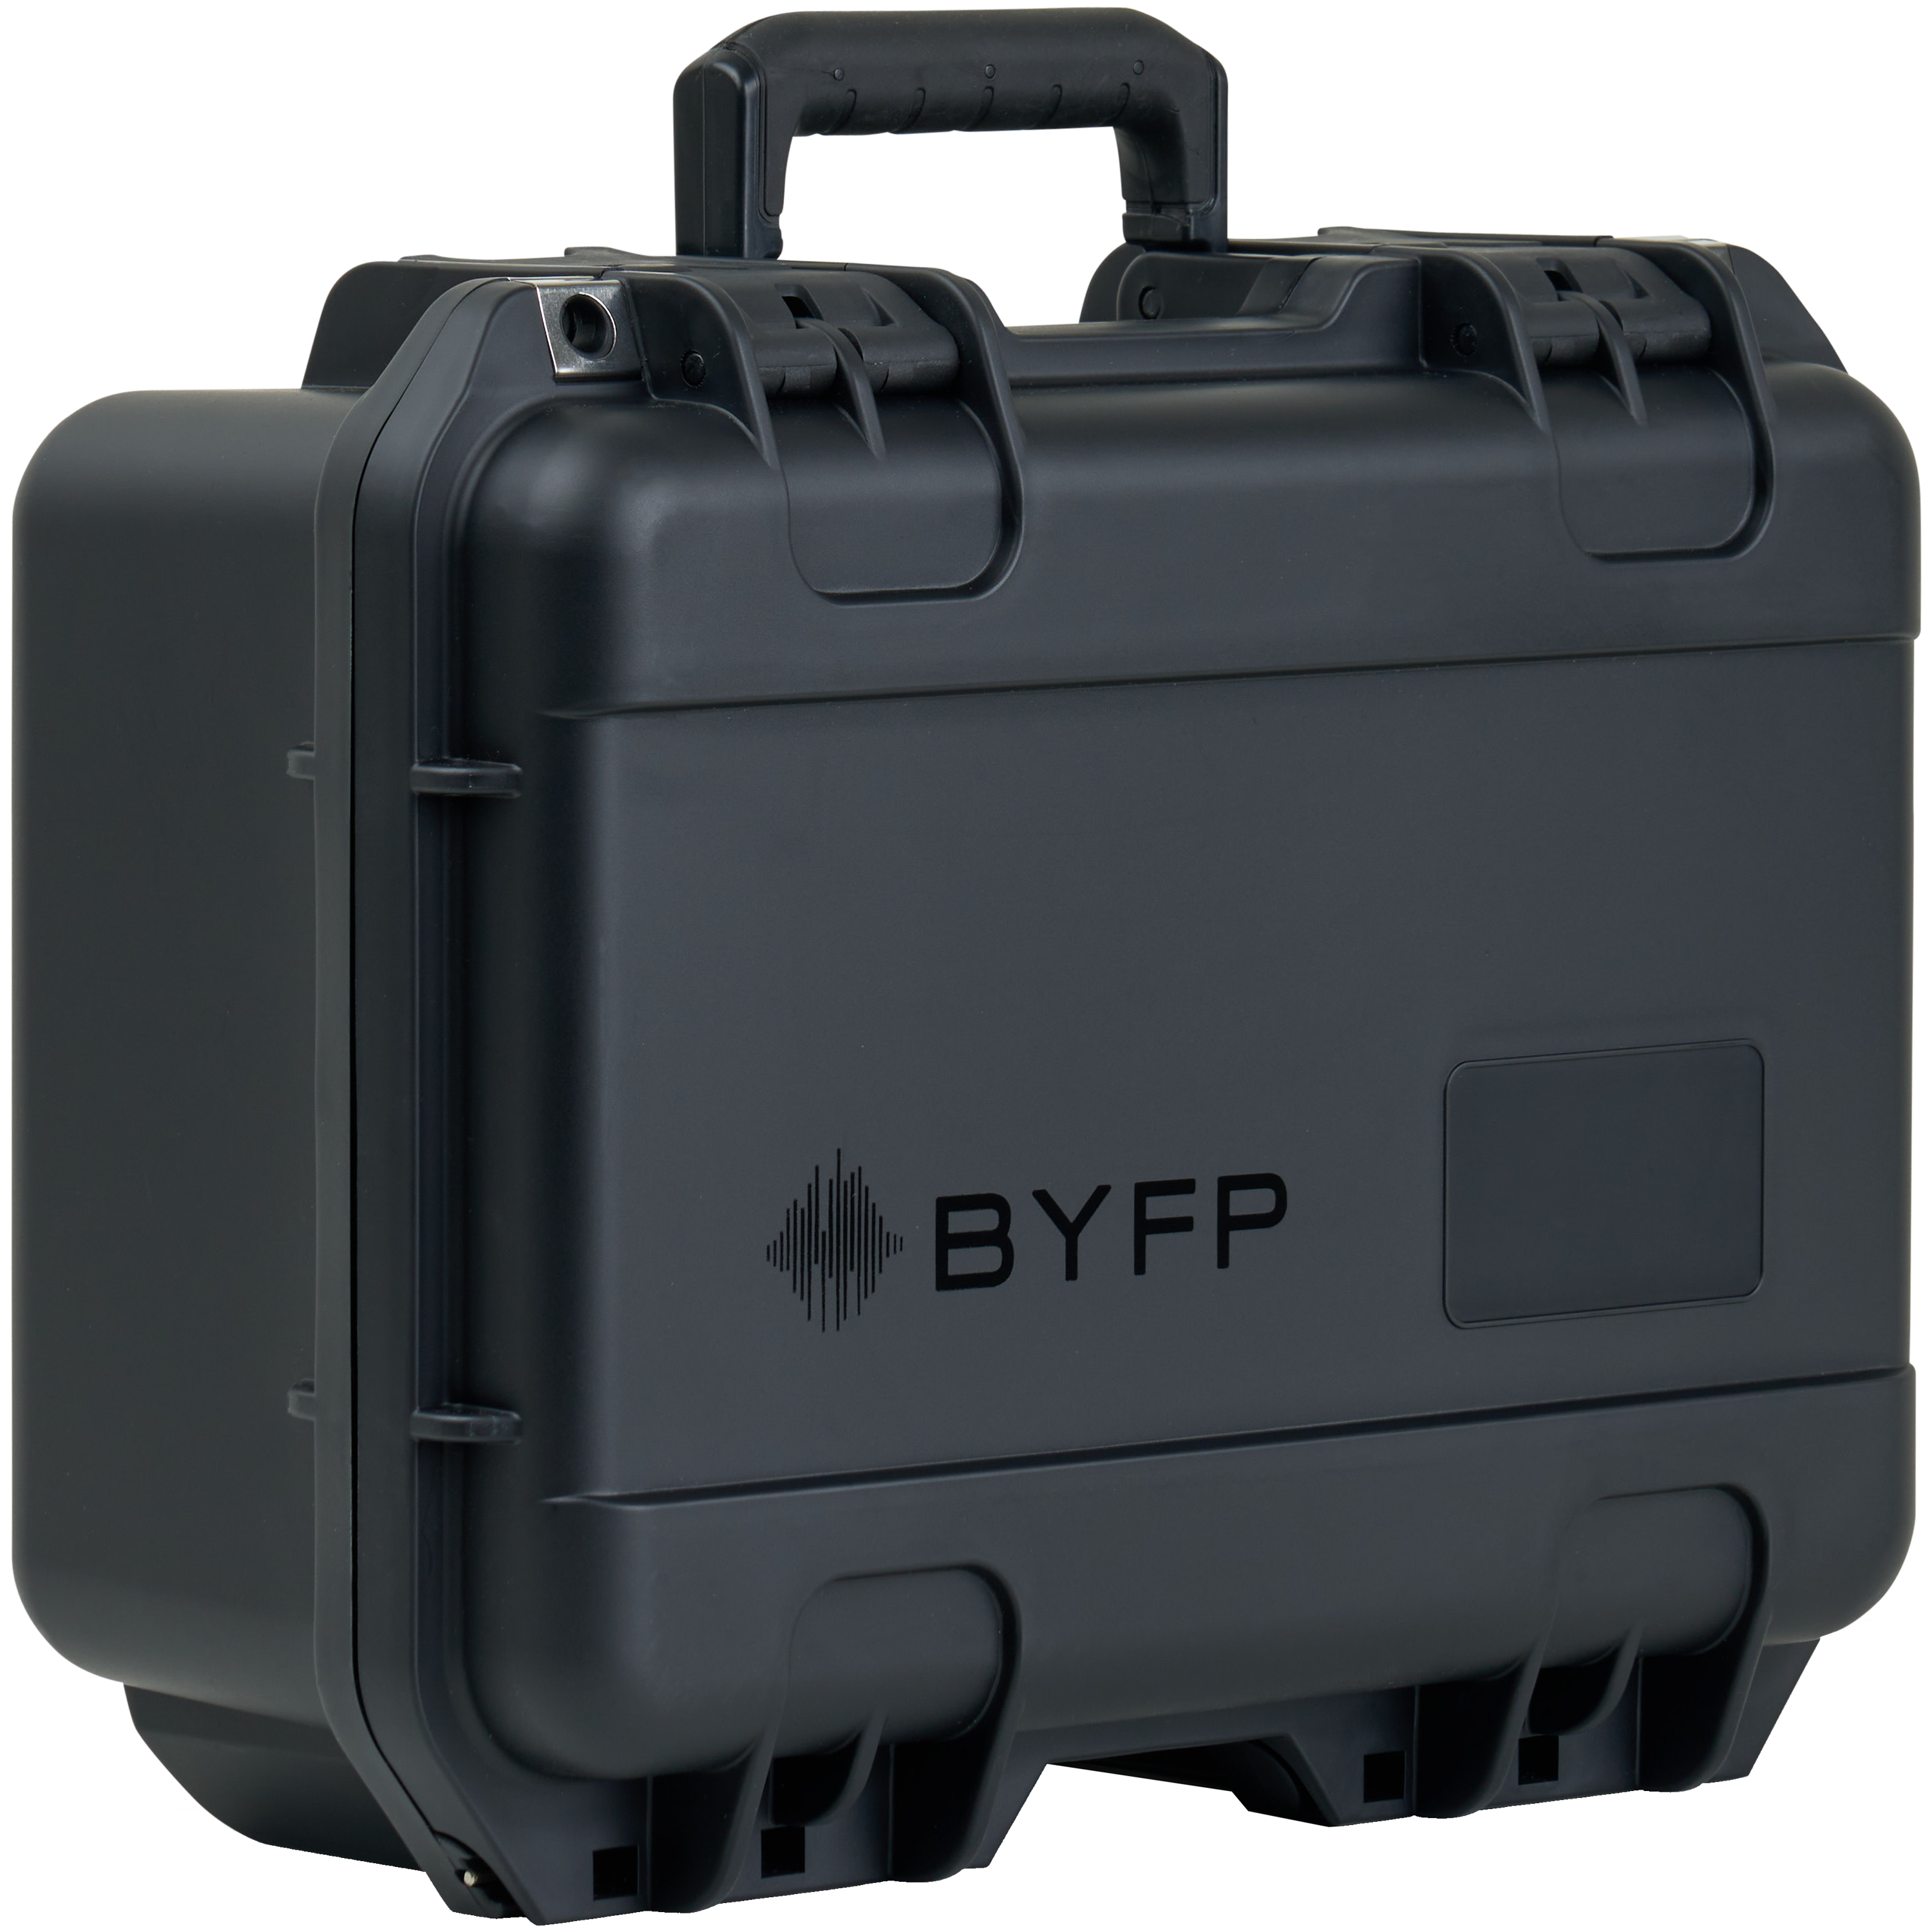 Radial Connectivity tourPack with BYFP ipCase